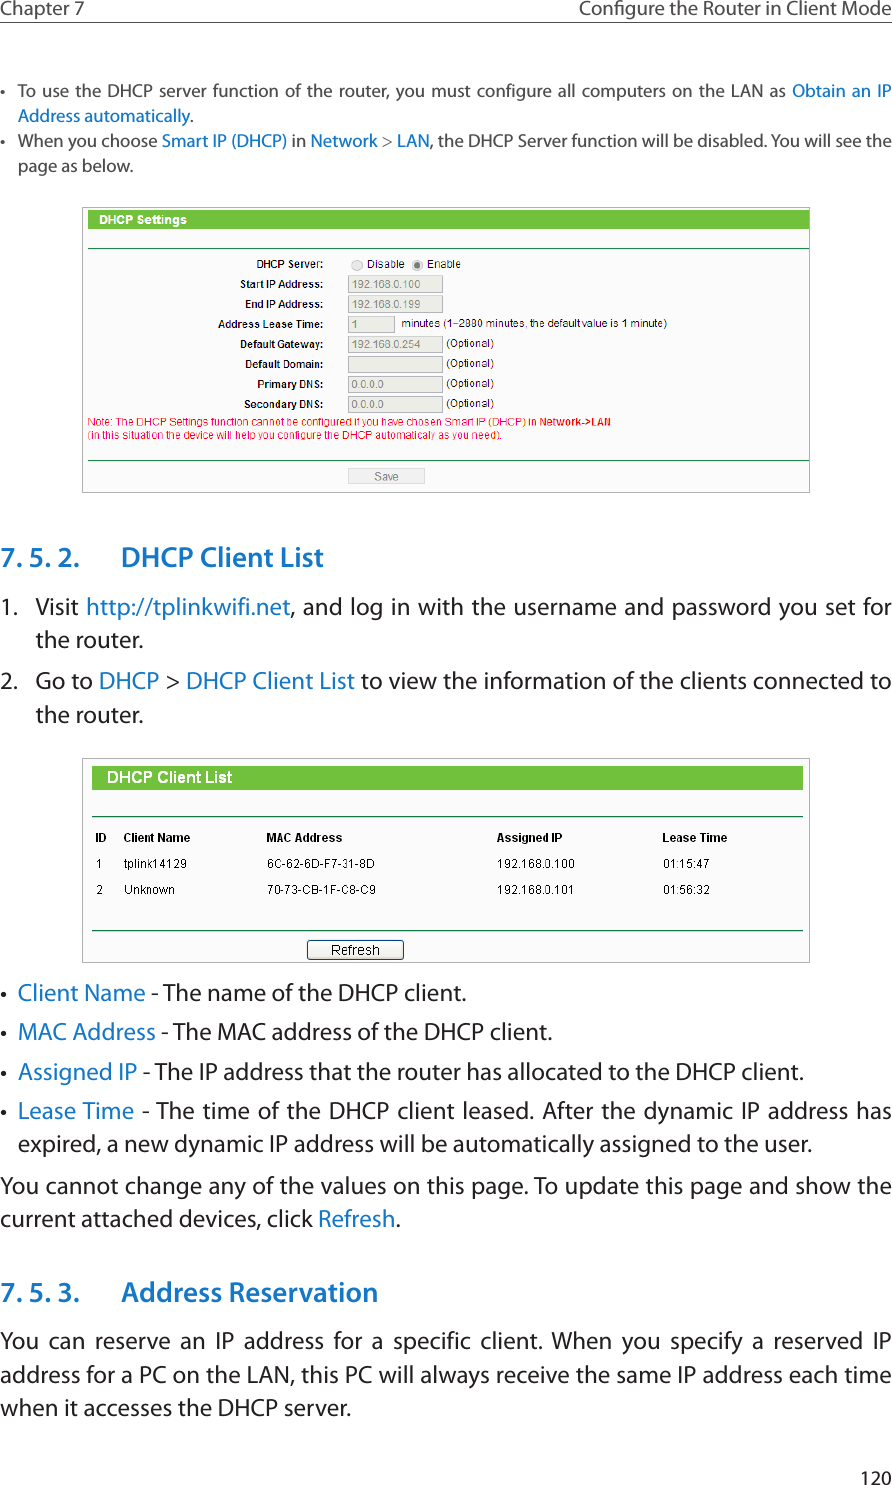 120Chapter 7 Congure the Router in Client Mode•  To use the DHCP server function of the router, you must configure all computers on the LAN as Obtain an IP Address automatically.•  When you choose Smart IP (DHCP) in Network &gt; LAN, the DHCP Server function will be disabled. You will see the page as below.7. 5. 2.  DHCP Client List1.  Visit http://tplinkwifi.net, and log in with the username and password you set for the router.2.  Go to DHCP &gt; DHCP Client List to view the information of the clients connected to the router.•  Client Name - The name of the DHCP client.•  MAC Address - The MAC address of the DHCP client. •  Assigned IP - The IP address that the router has allocated to the DHCP client.•  Lease Time - The time of the DHCP client leased. After the dynamic IP address has expired, a new dynamic IP address will be automatically assigned to the user.  You cannot change any of the values on this page. To update this page and show the current attached devices, click Refresh.7. 5. 3.  Address ReservationYou can reserve an IP address for a specific client. When you specify a reserved IP address for a PC on the LAN, this PC will always receive the same IP address each time when it accesses the DHCP server.